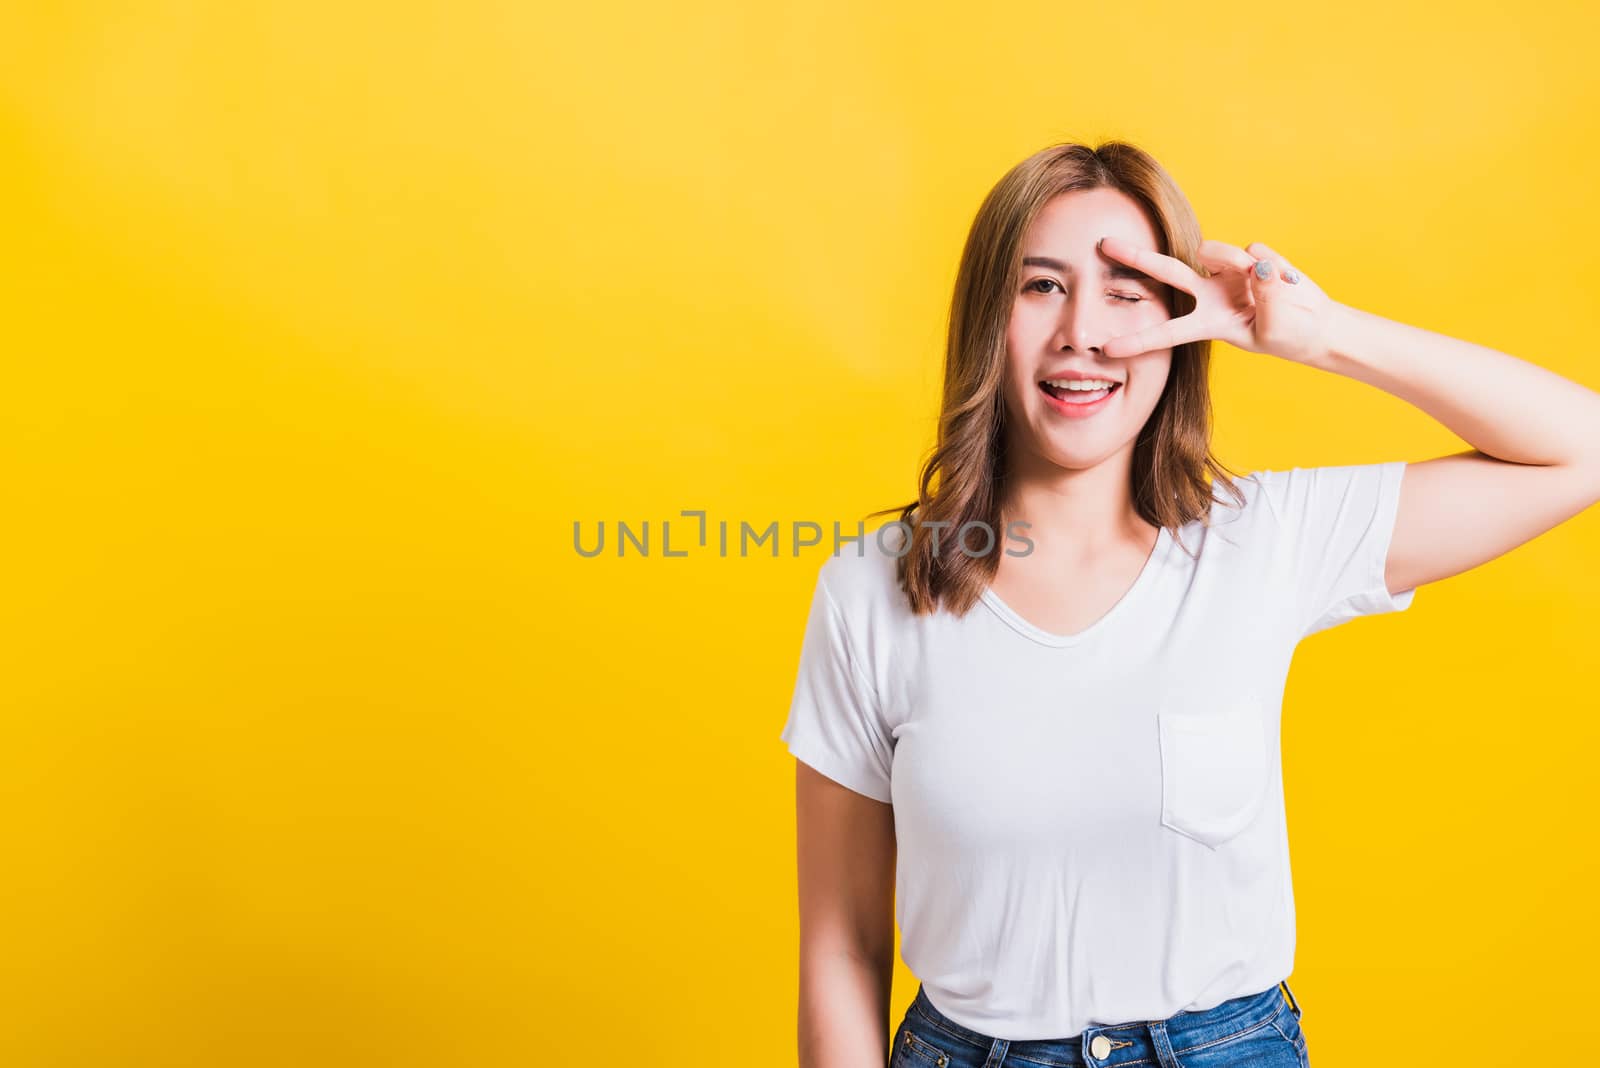 Asian Thai happy portrait beautiful cute young woman smile standing wear t-shirt showing finger making v-sign symbol near eye looking to camera, isolated studio shot yellow background with copy space